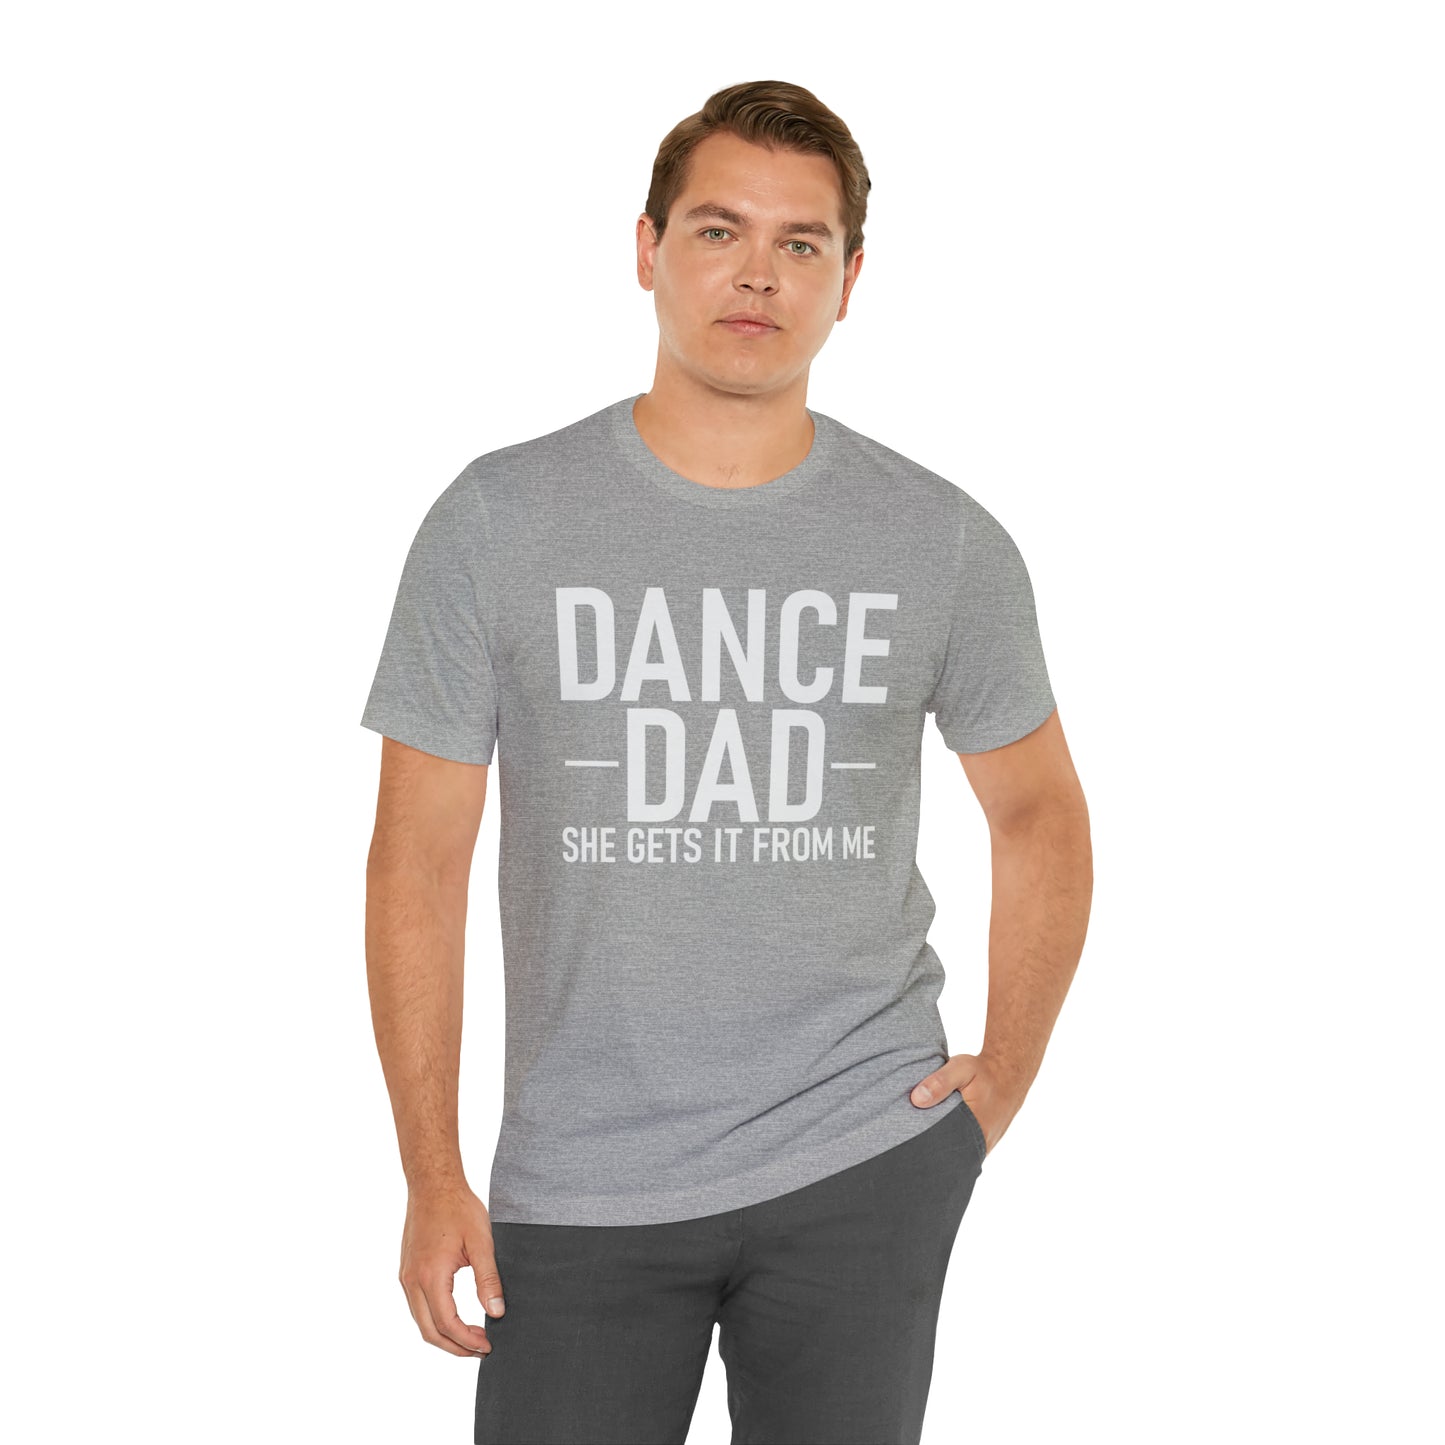 DANCE DAD - she gets it from me  Short Sleeve Unisex Adult Tee